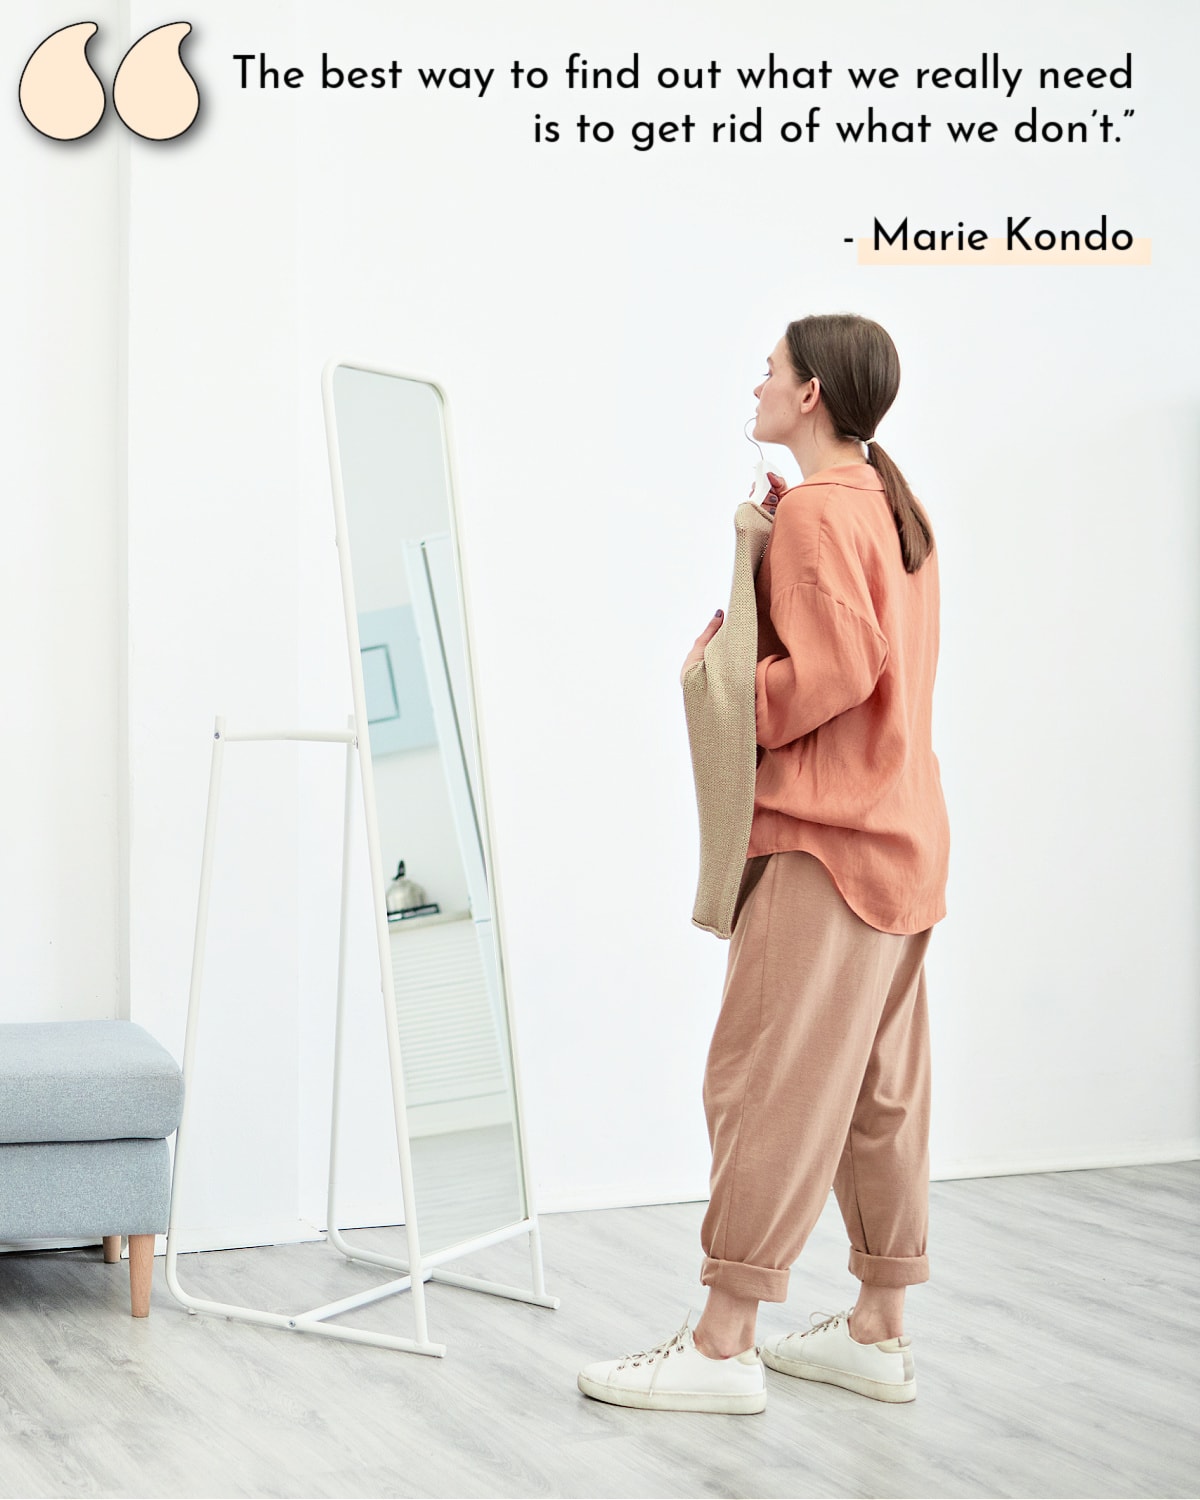 A woman remembering a Marie Kondo declutter quote as she looks in a mirror